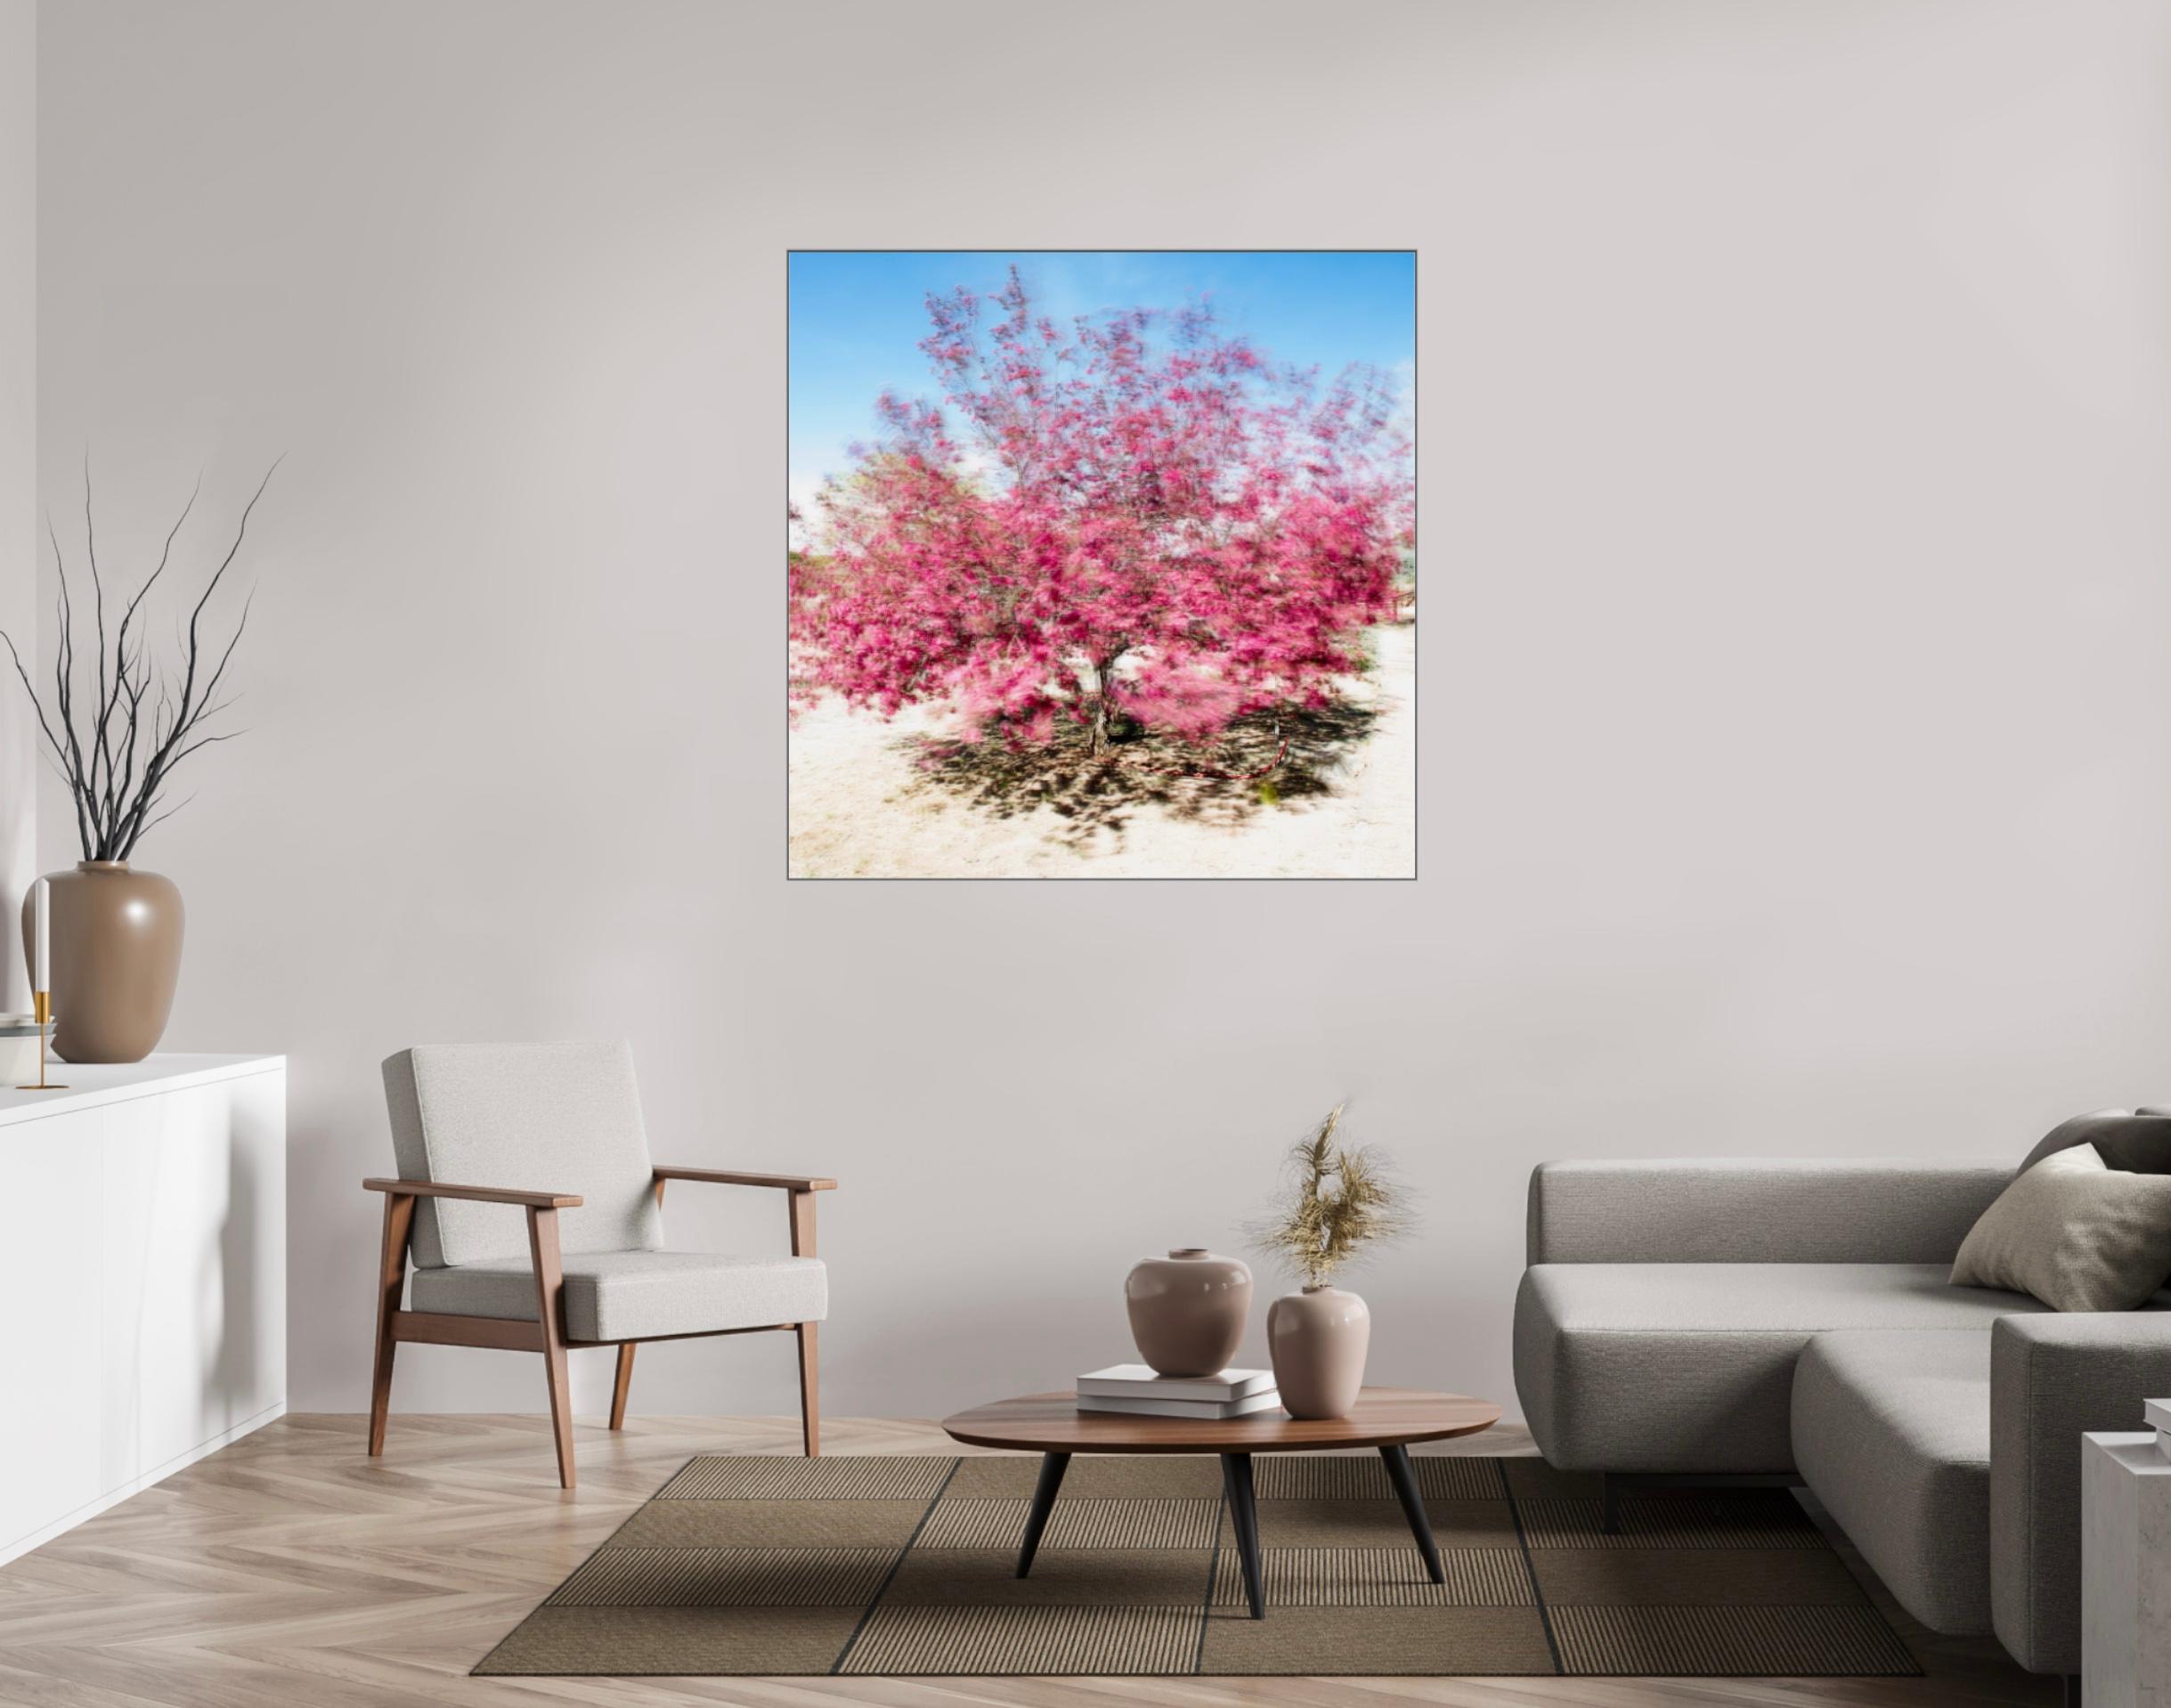 THE BLOSSOM - under Acrylic Glass - Contemporary Photograph by Albert Delamour